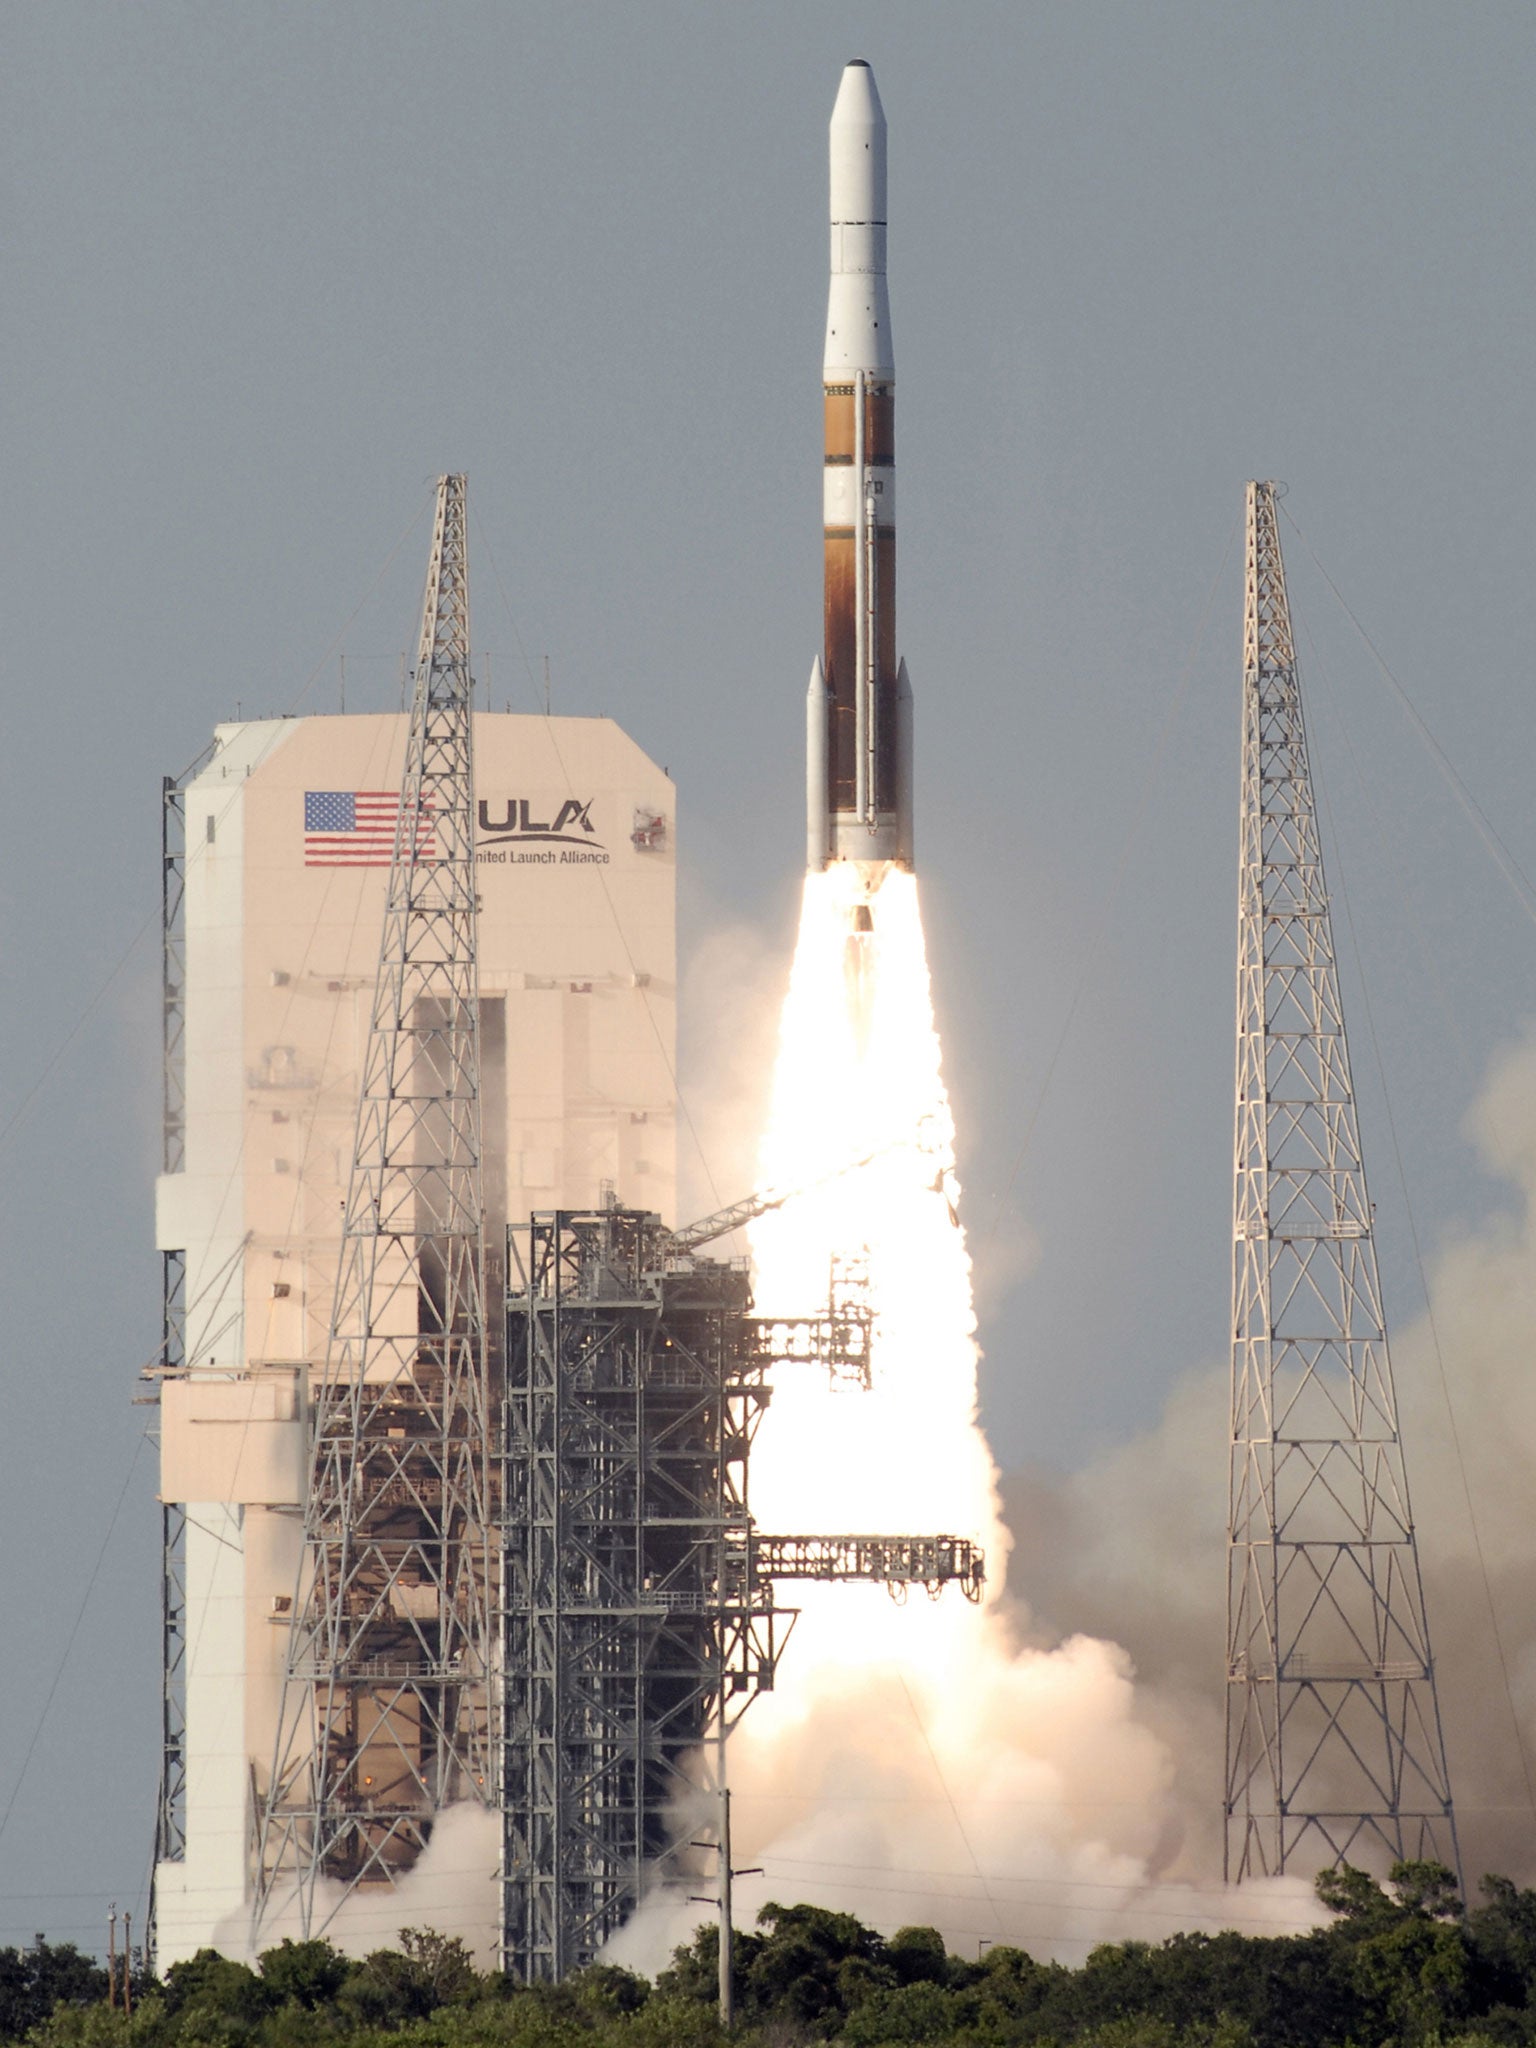 The failed satellite, launched by Nasa in 2006, was designed to last 10 years